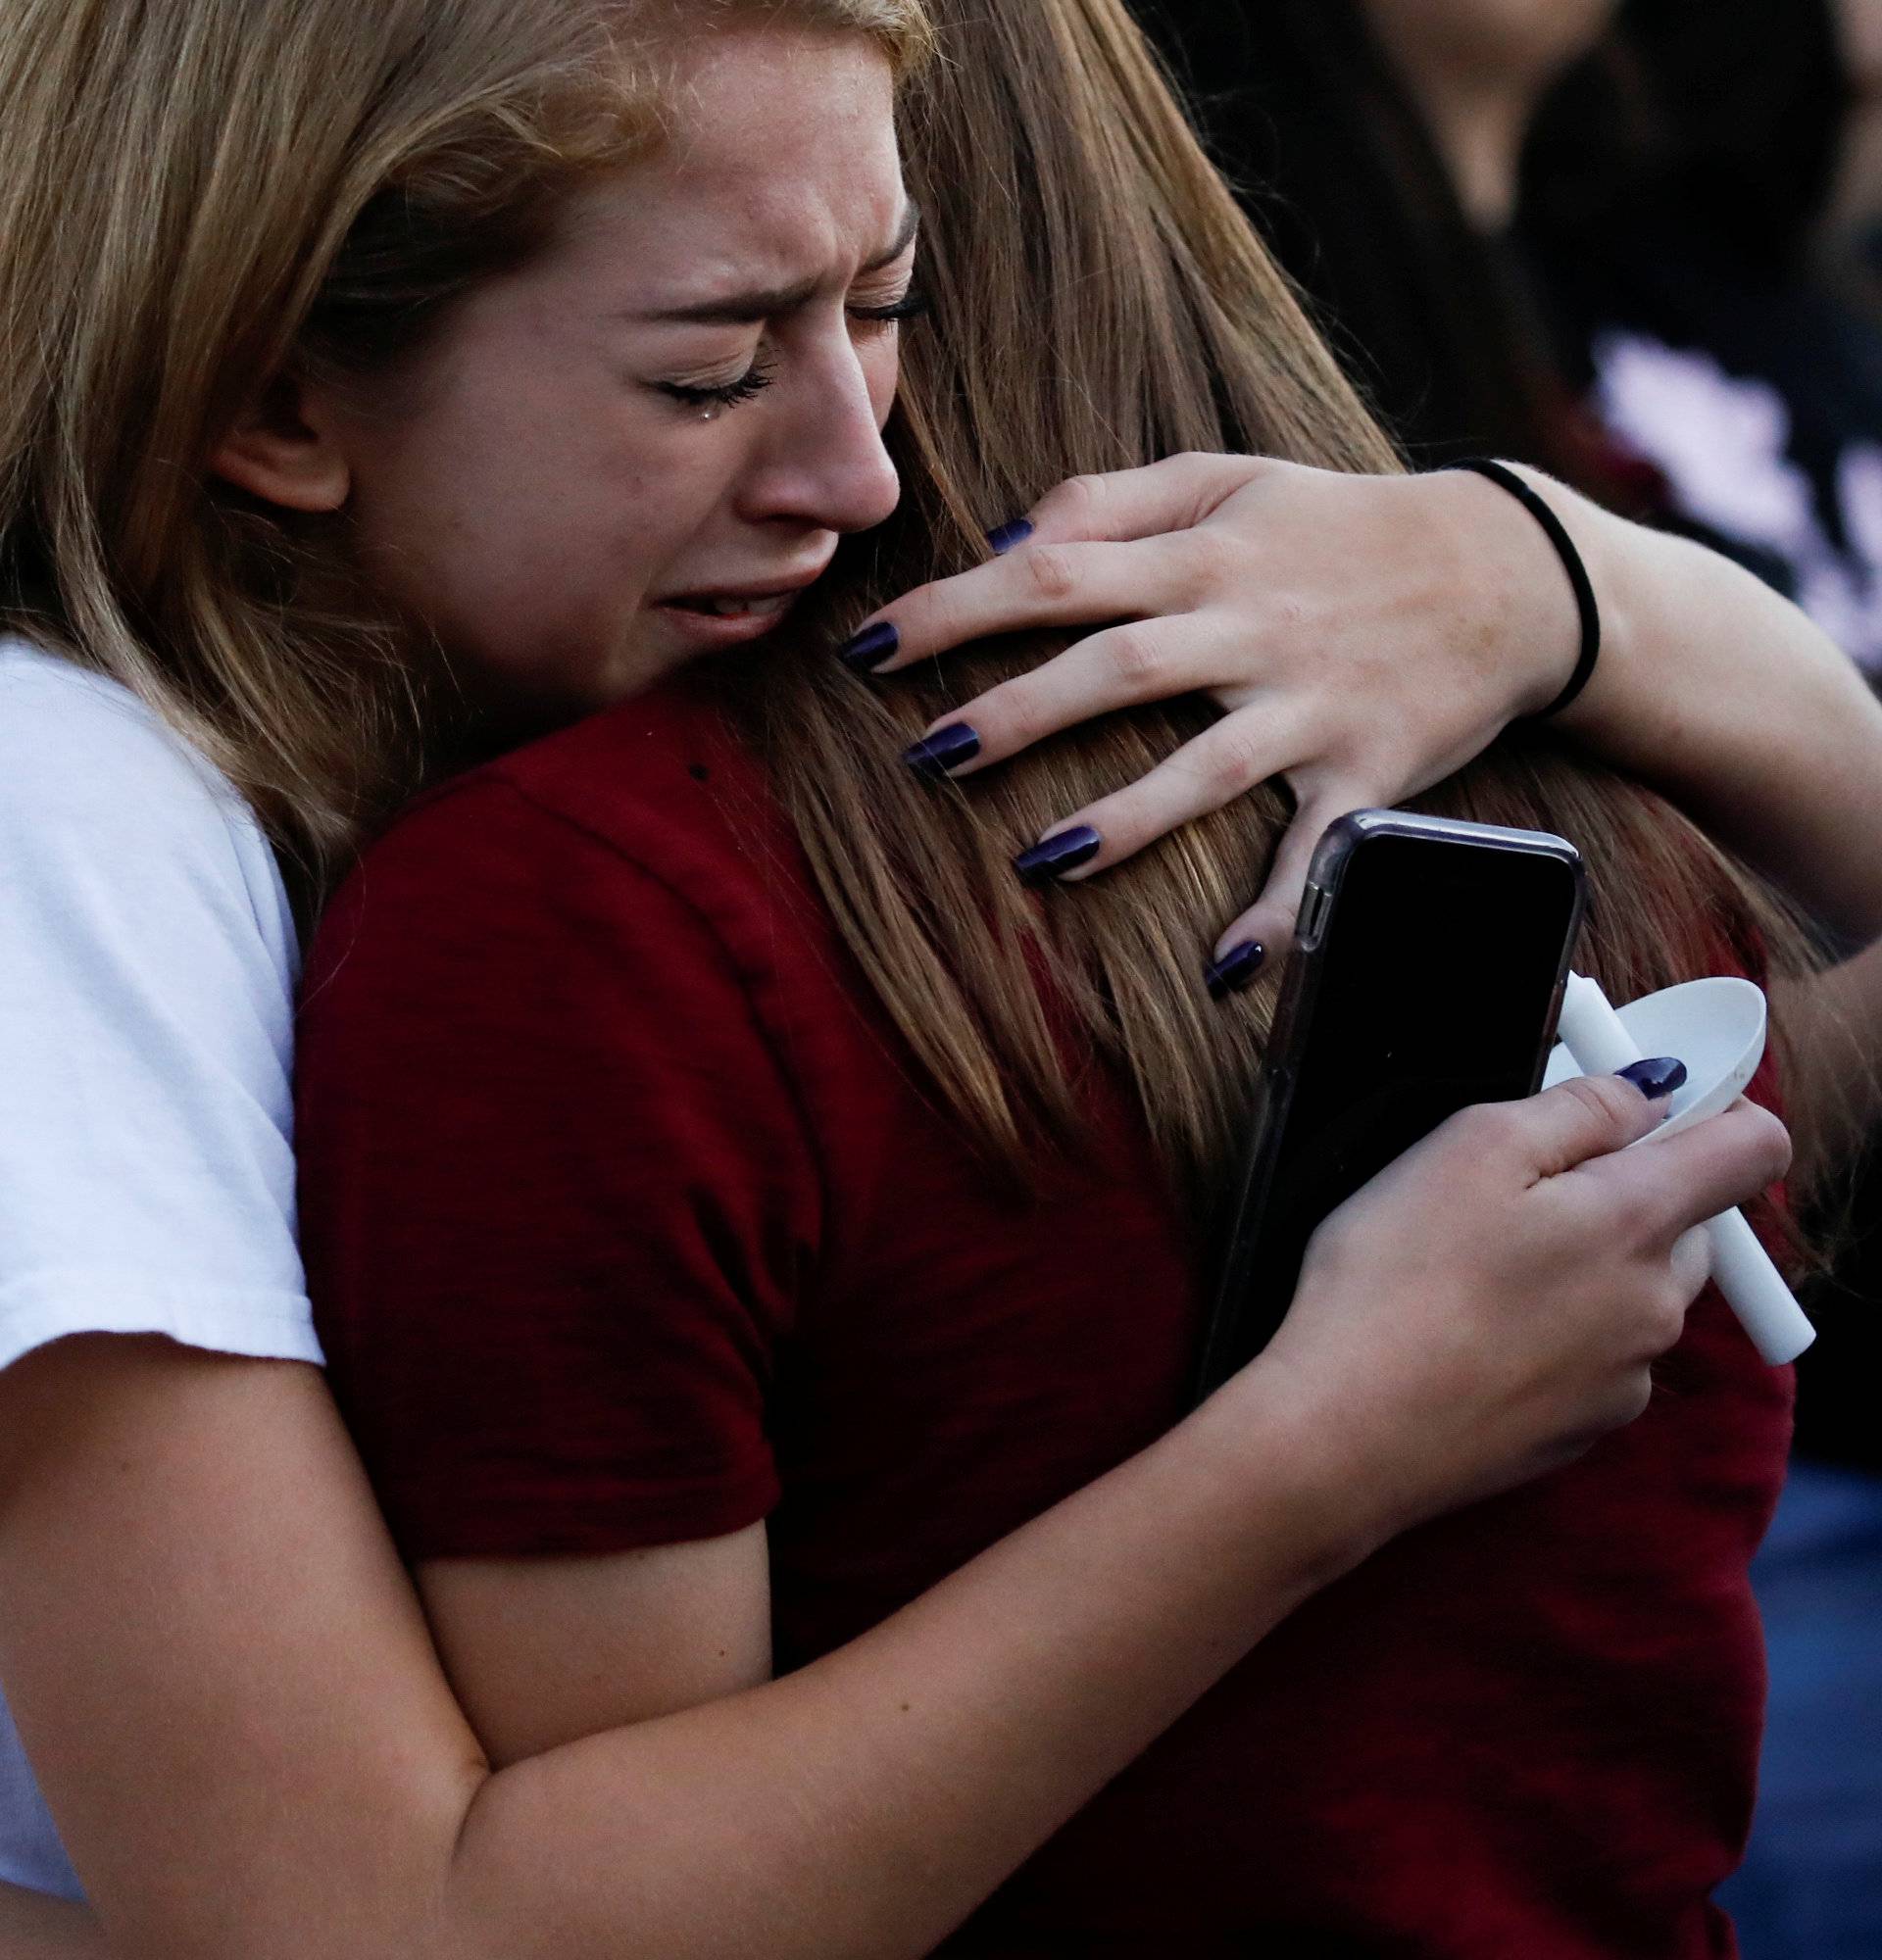 Students mourn during a candlelight vigil for victims of yesterday's shooting at nearby Marjory Stoneman Douglas High School, in Parkland